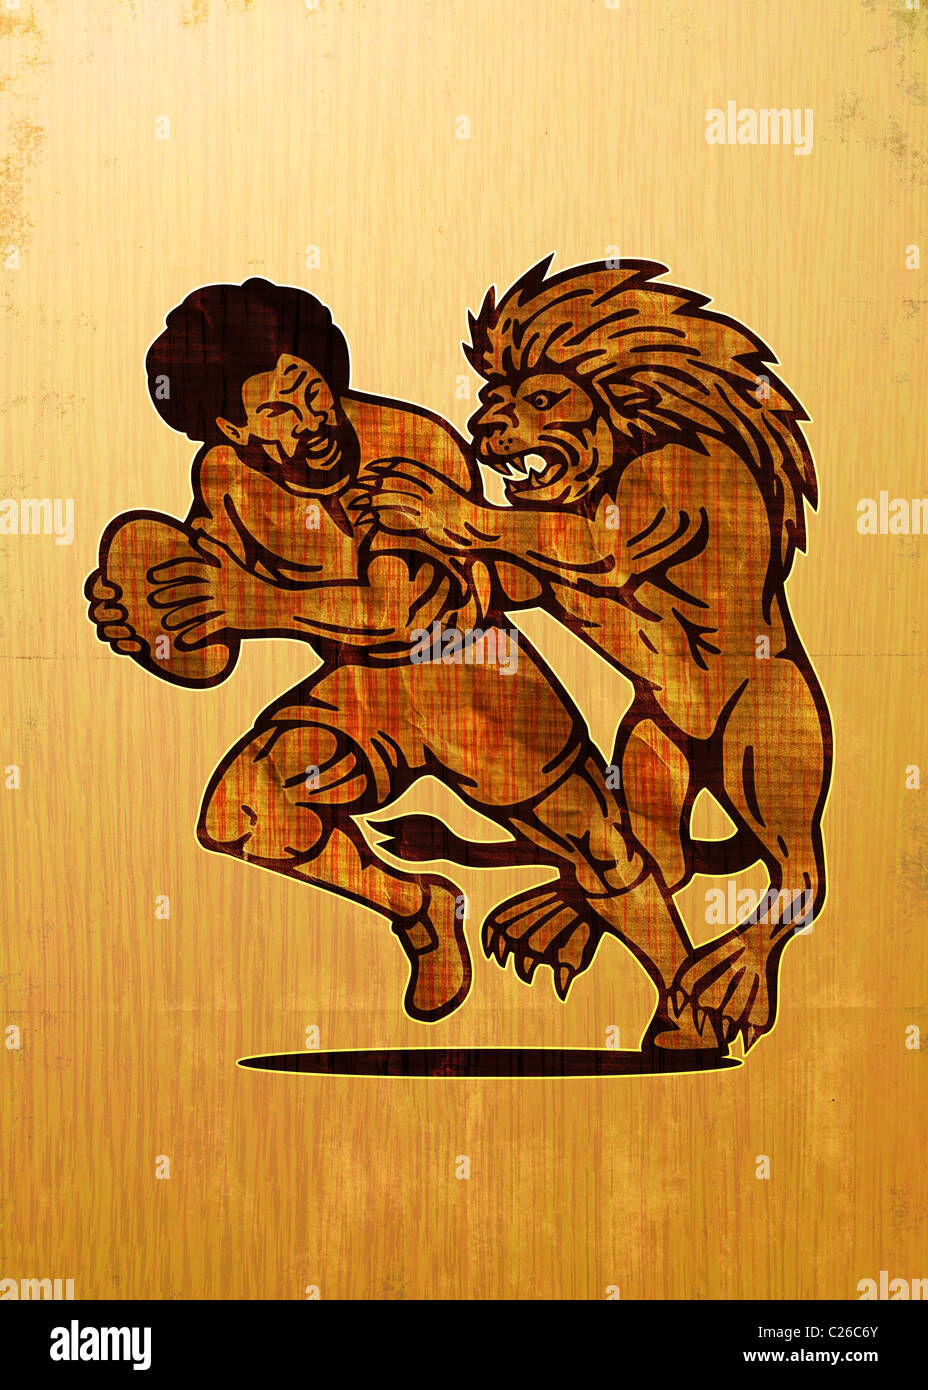 illustration of a Rugby player running with ball attack by lion with grunge and wood grain texture background Stock Photo